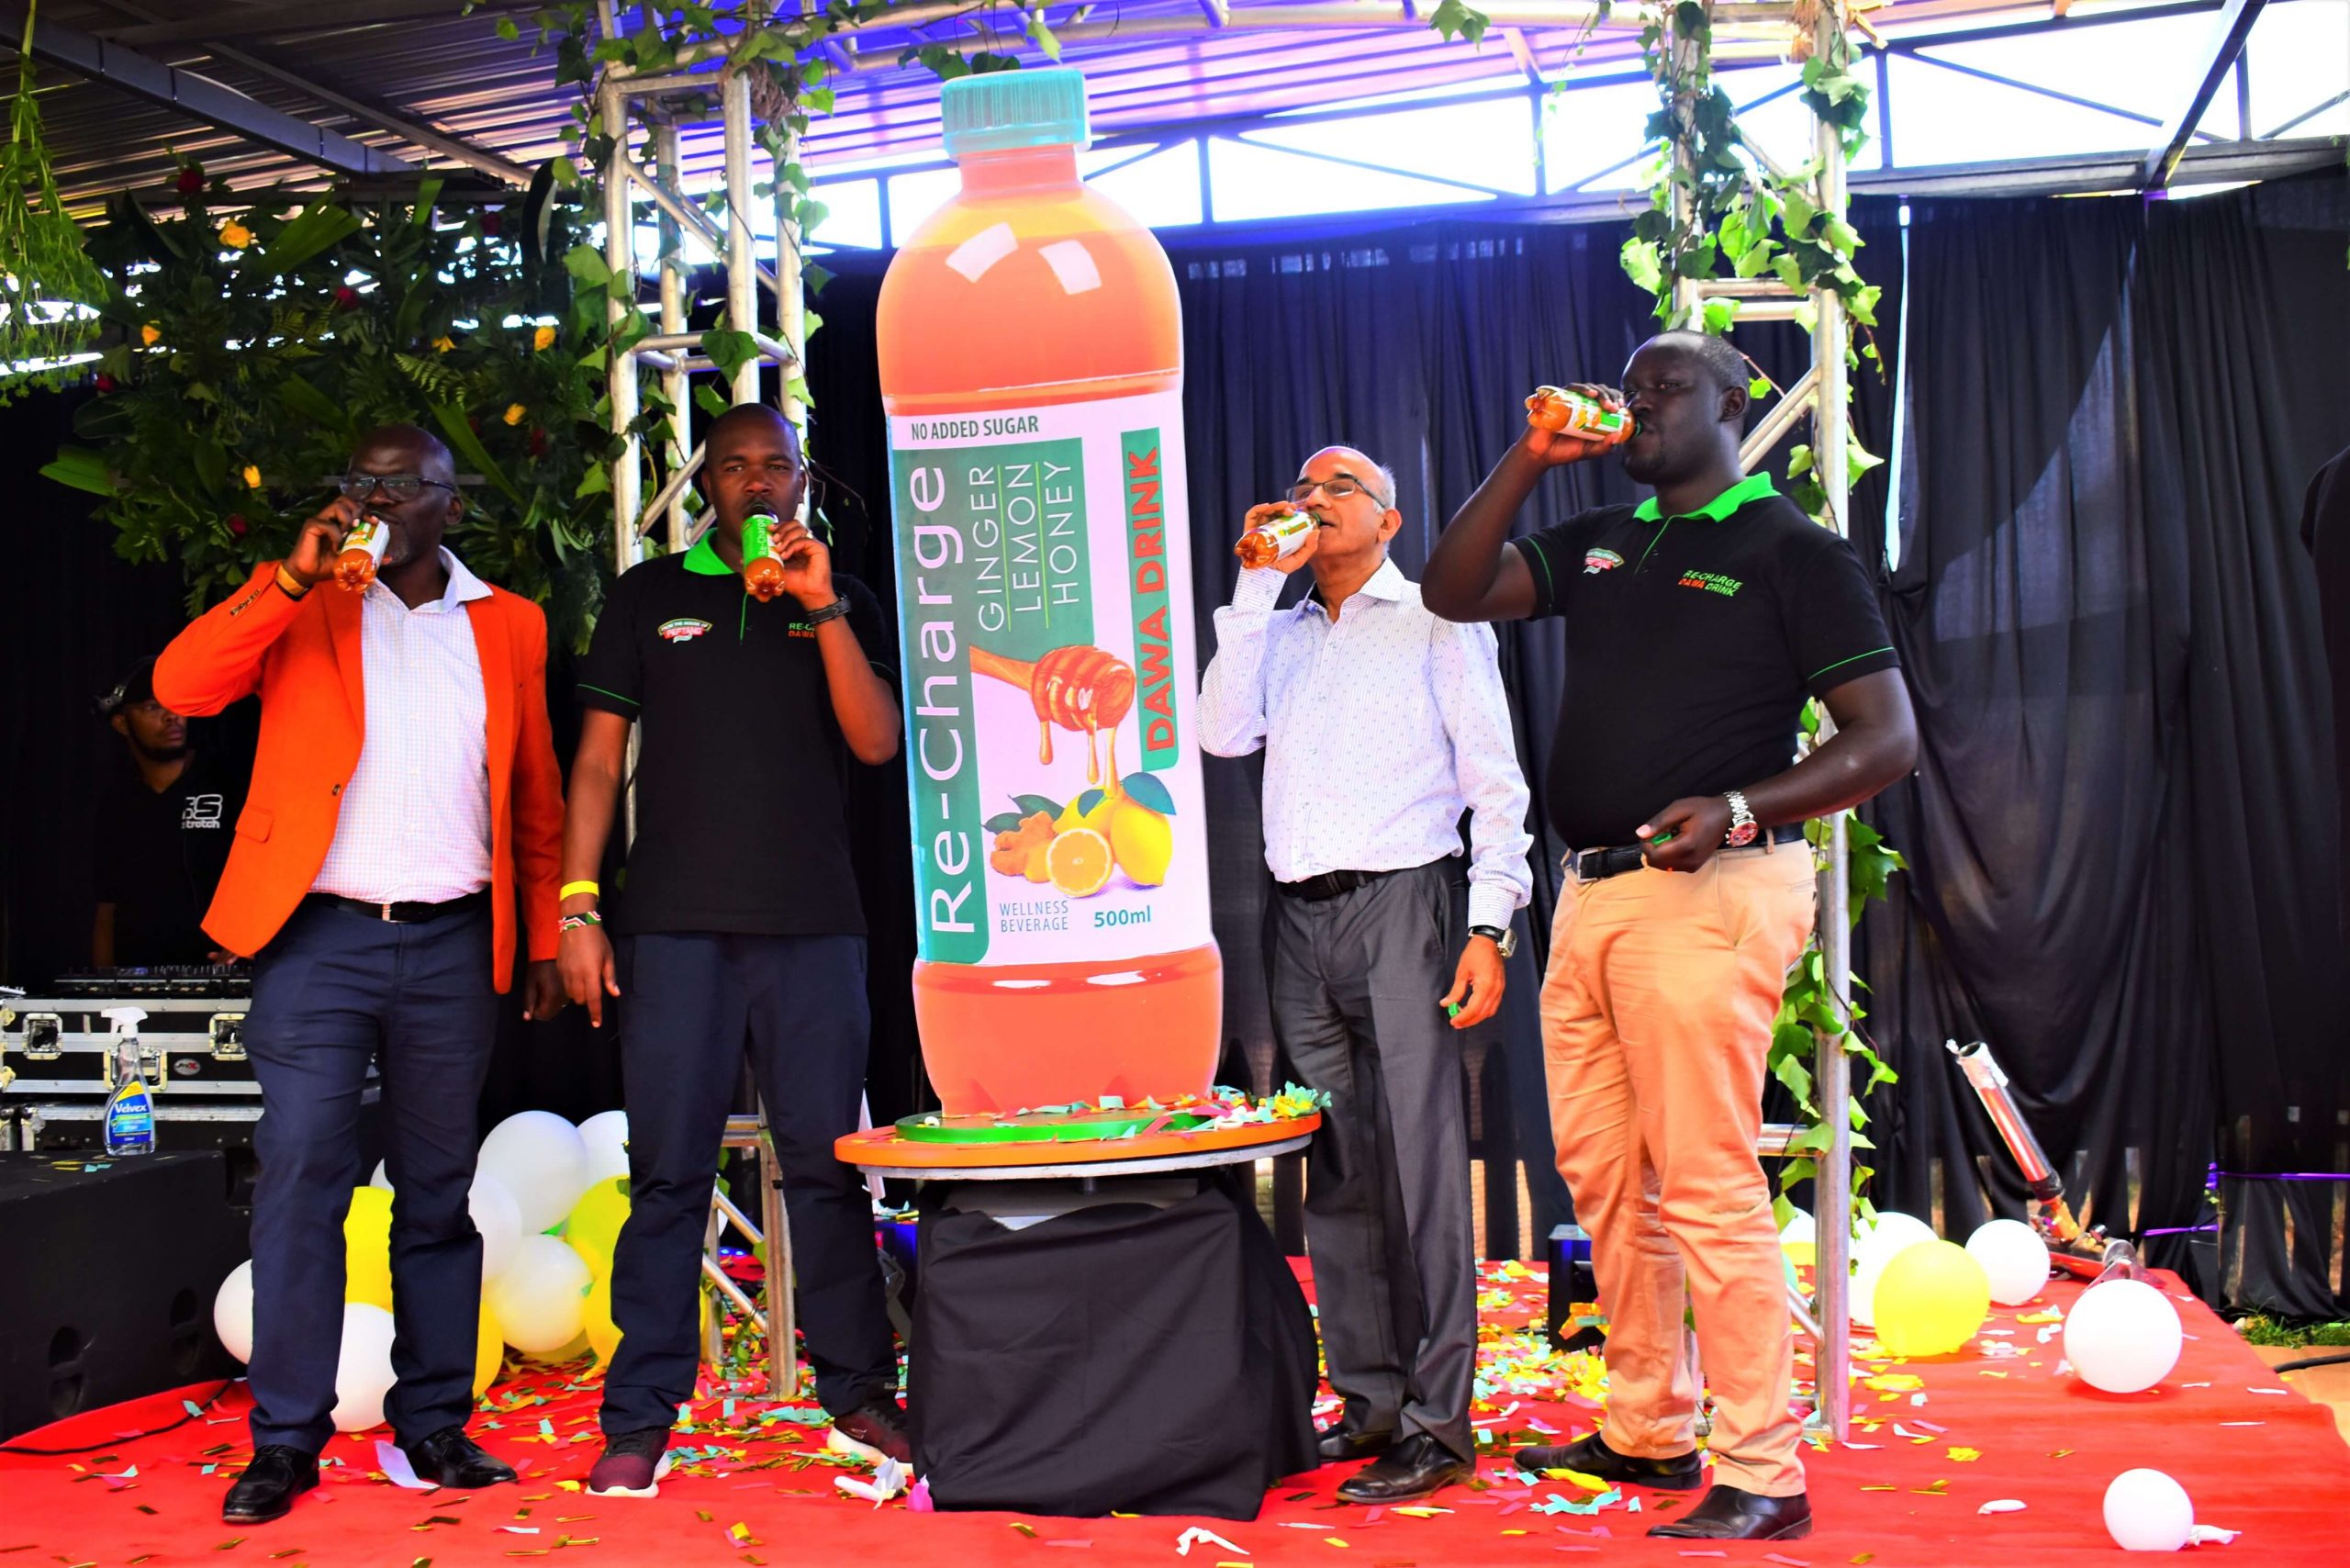 Re-charge Dawa drink Launch: An innovation driven by the Covid-19 pandemic